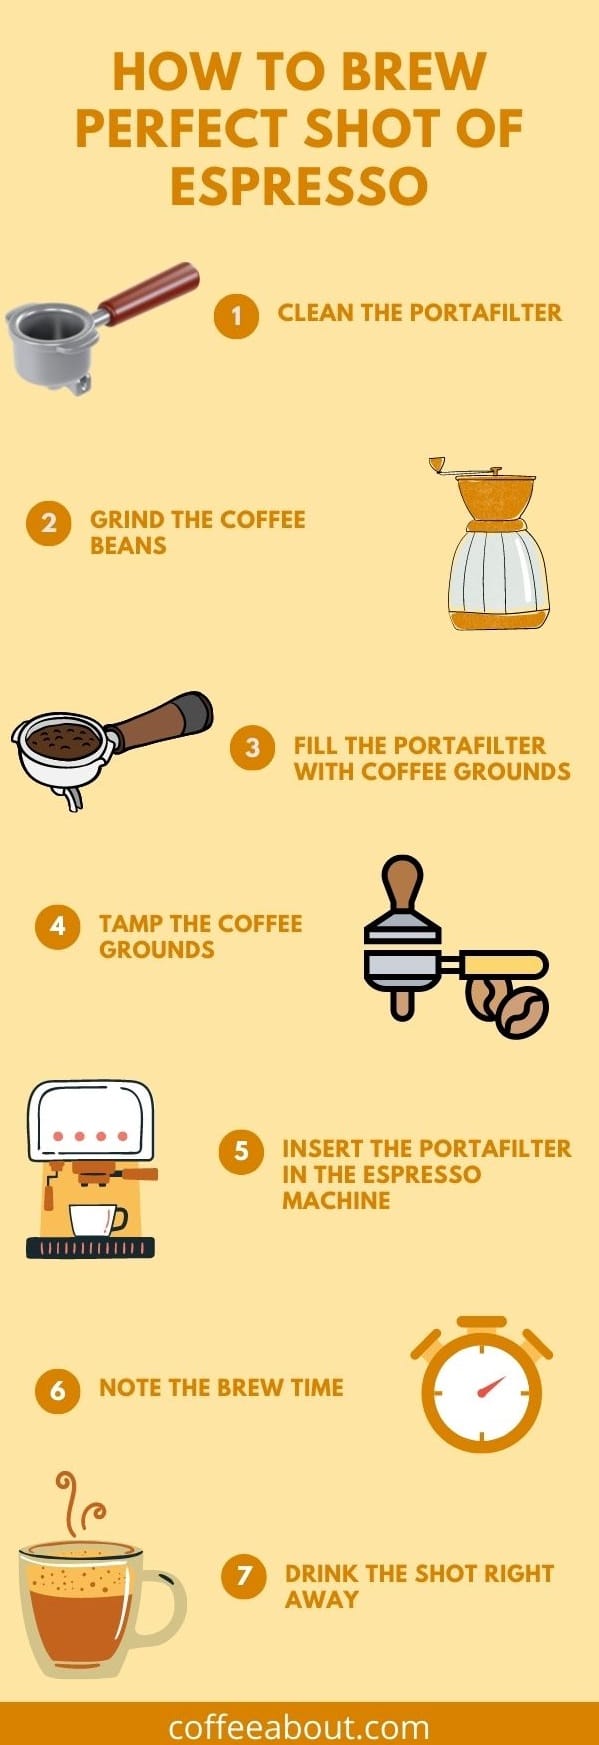 How to brew perfect shot of espresso